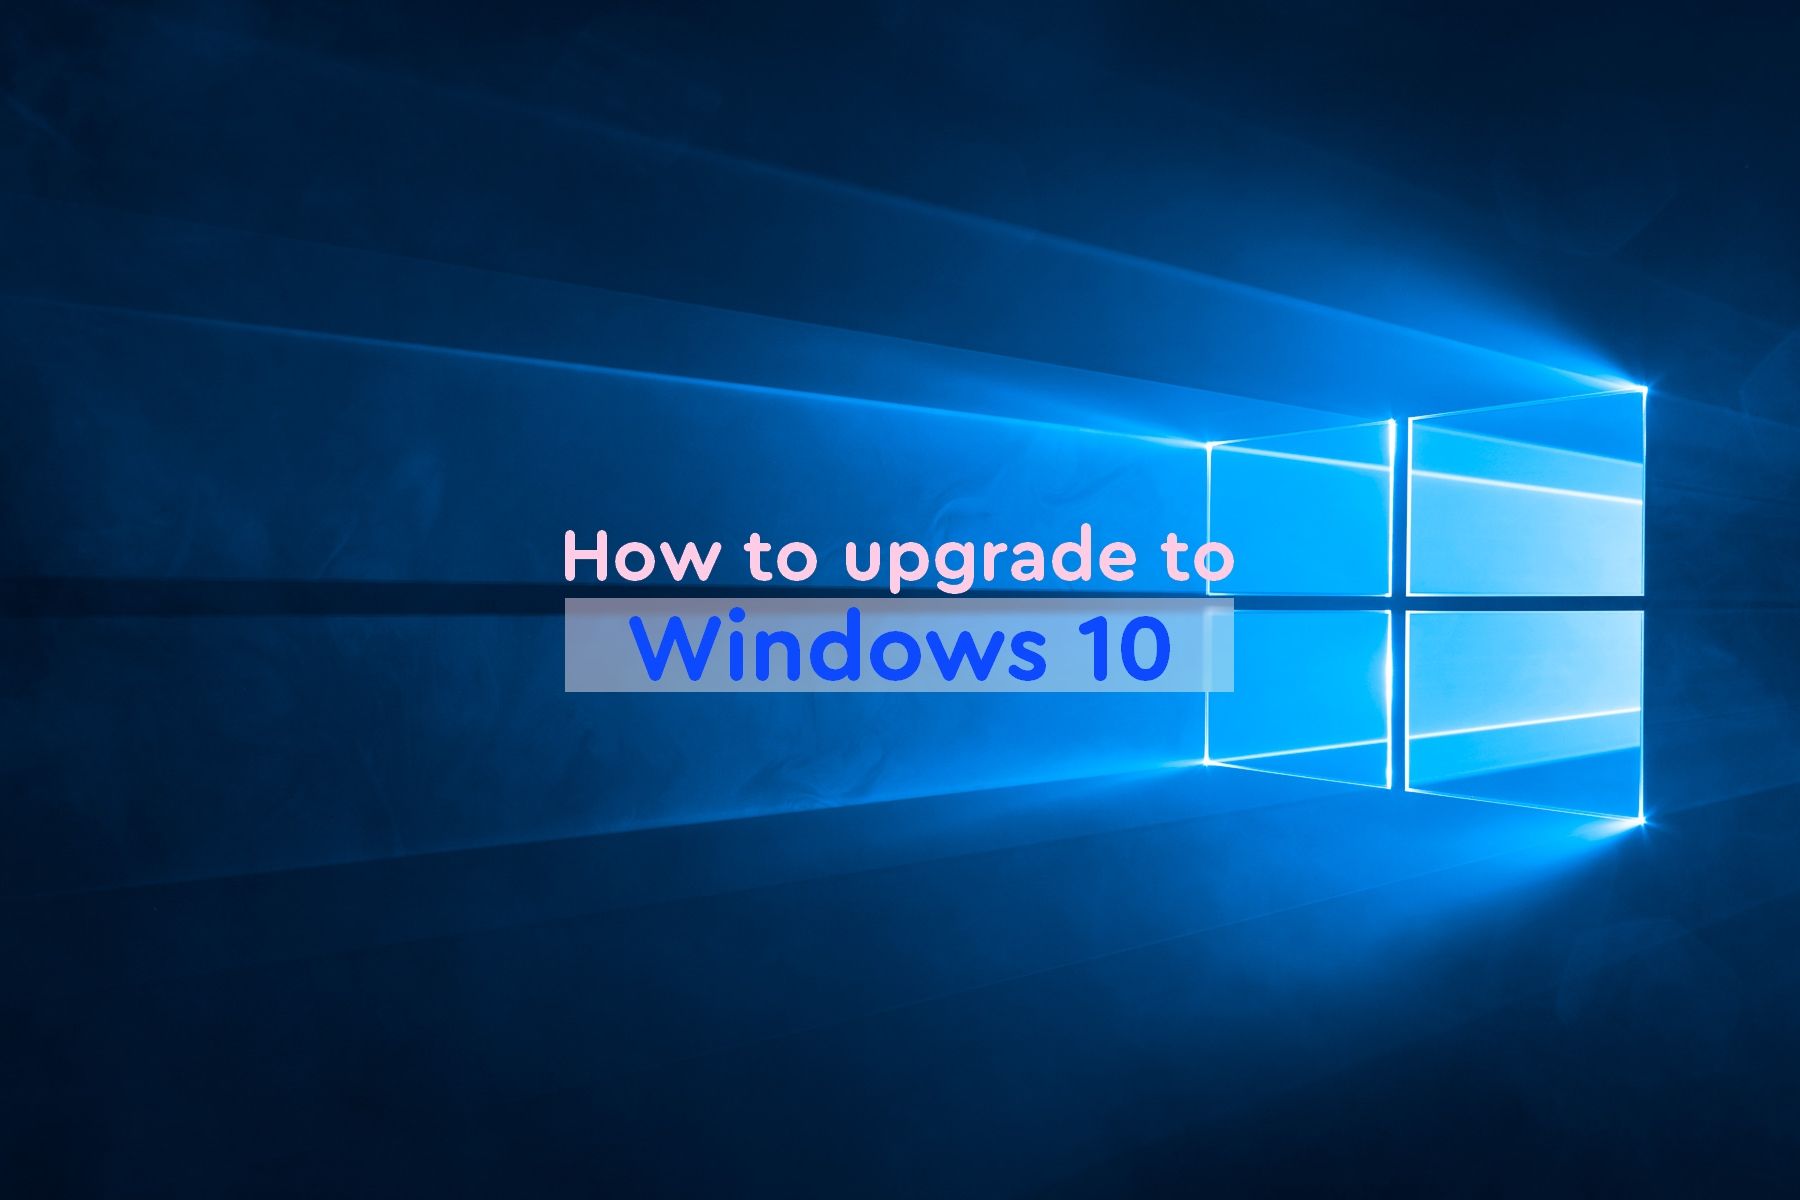 How to upgrade to Windows 10 from Windows 7 or 8.1